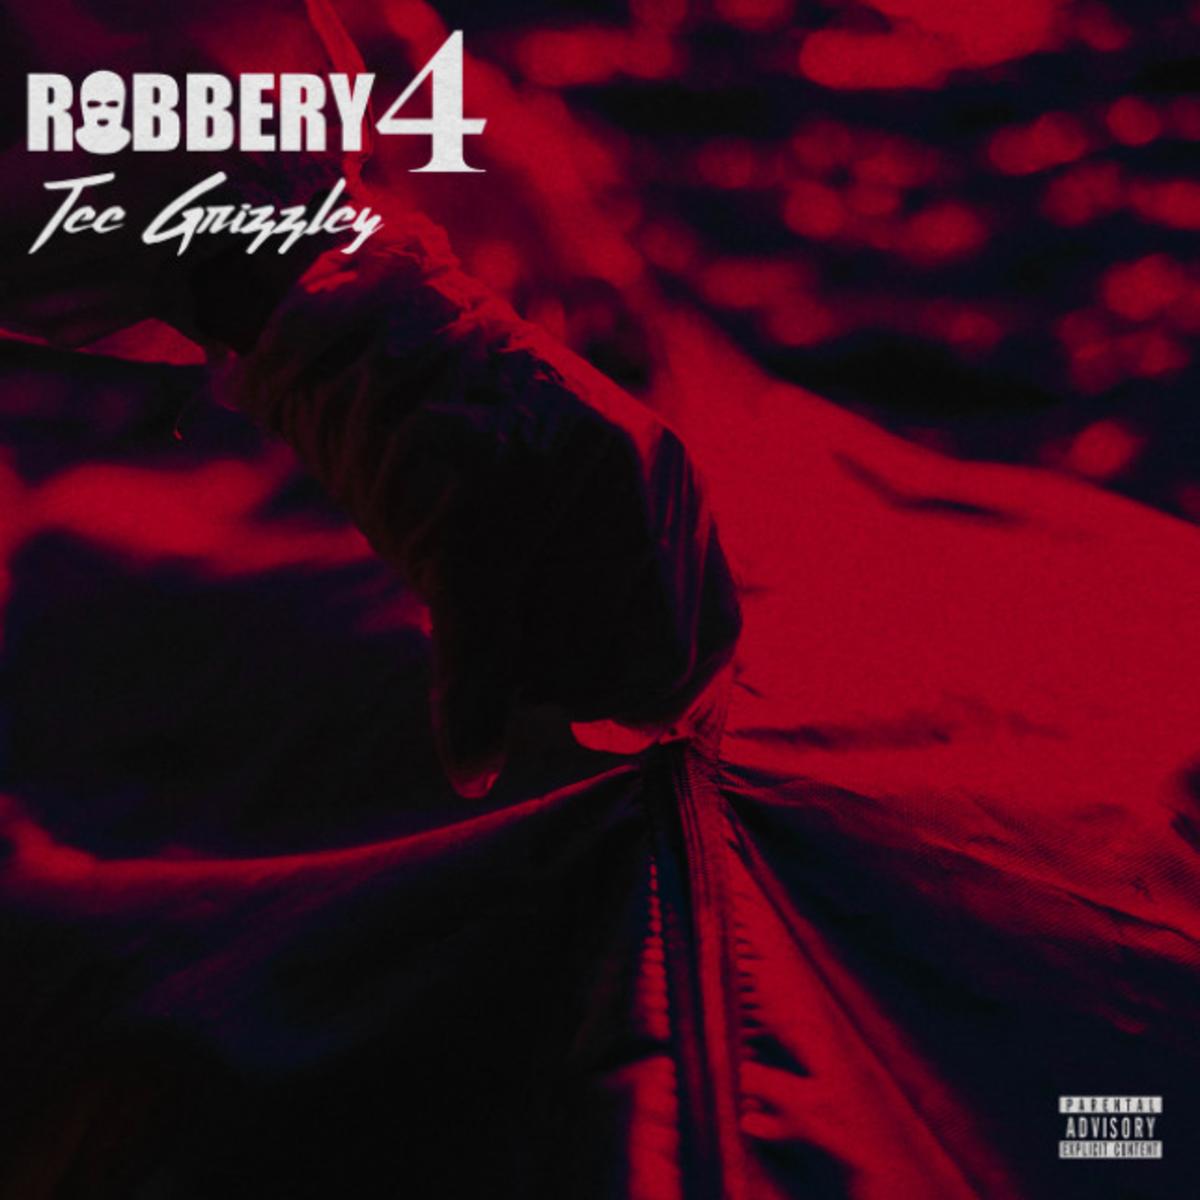 Tee Grizzley Steals The Show In “Robbery Part 4”